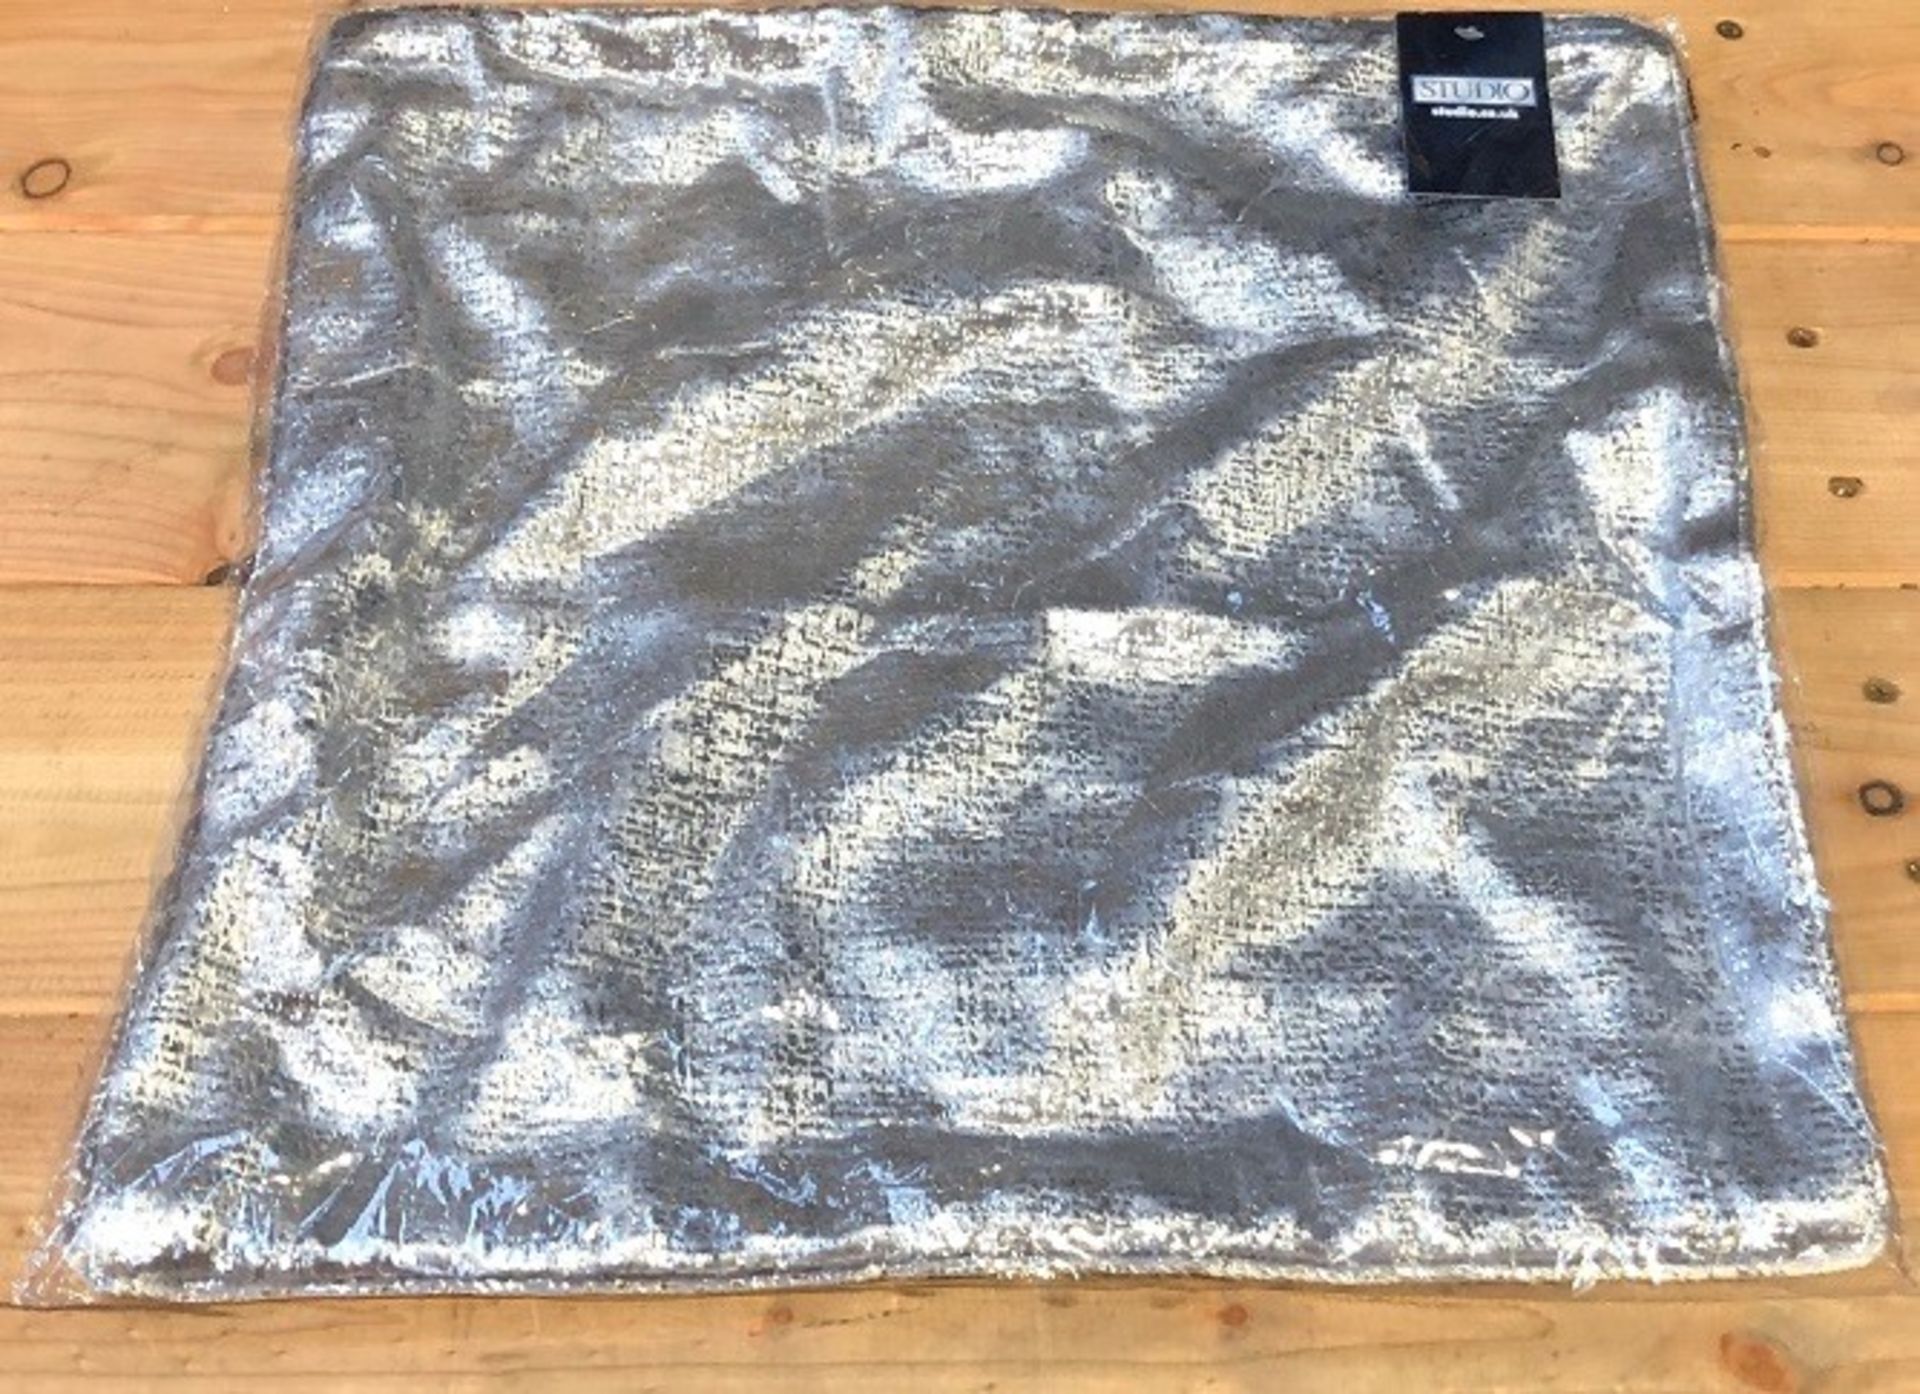 1 BAGGED VENUS METALLIC VELVET CUSHION COVER (PUBLIC VIEWING AVAILABLE)